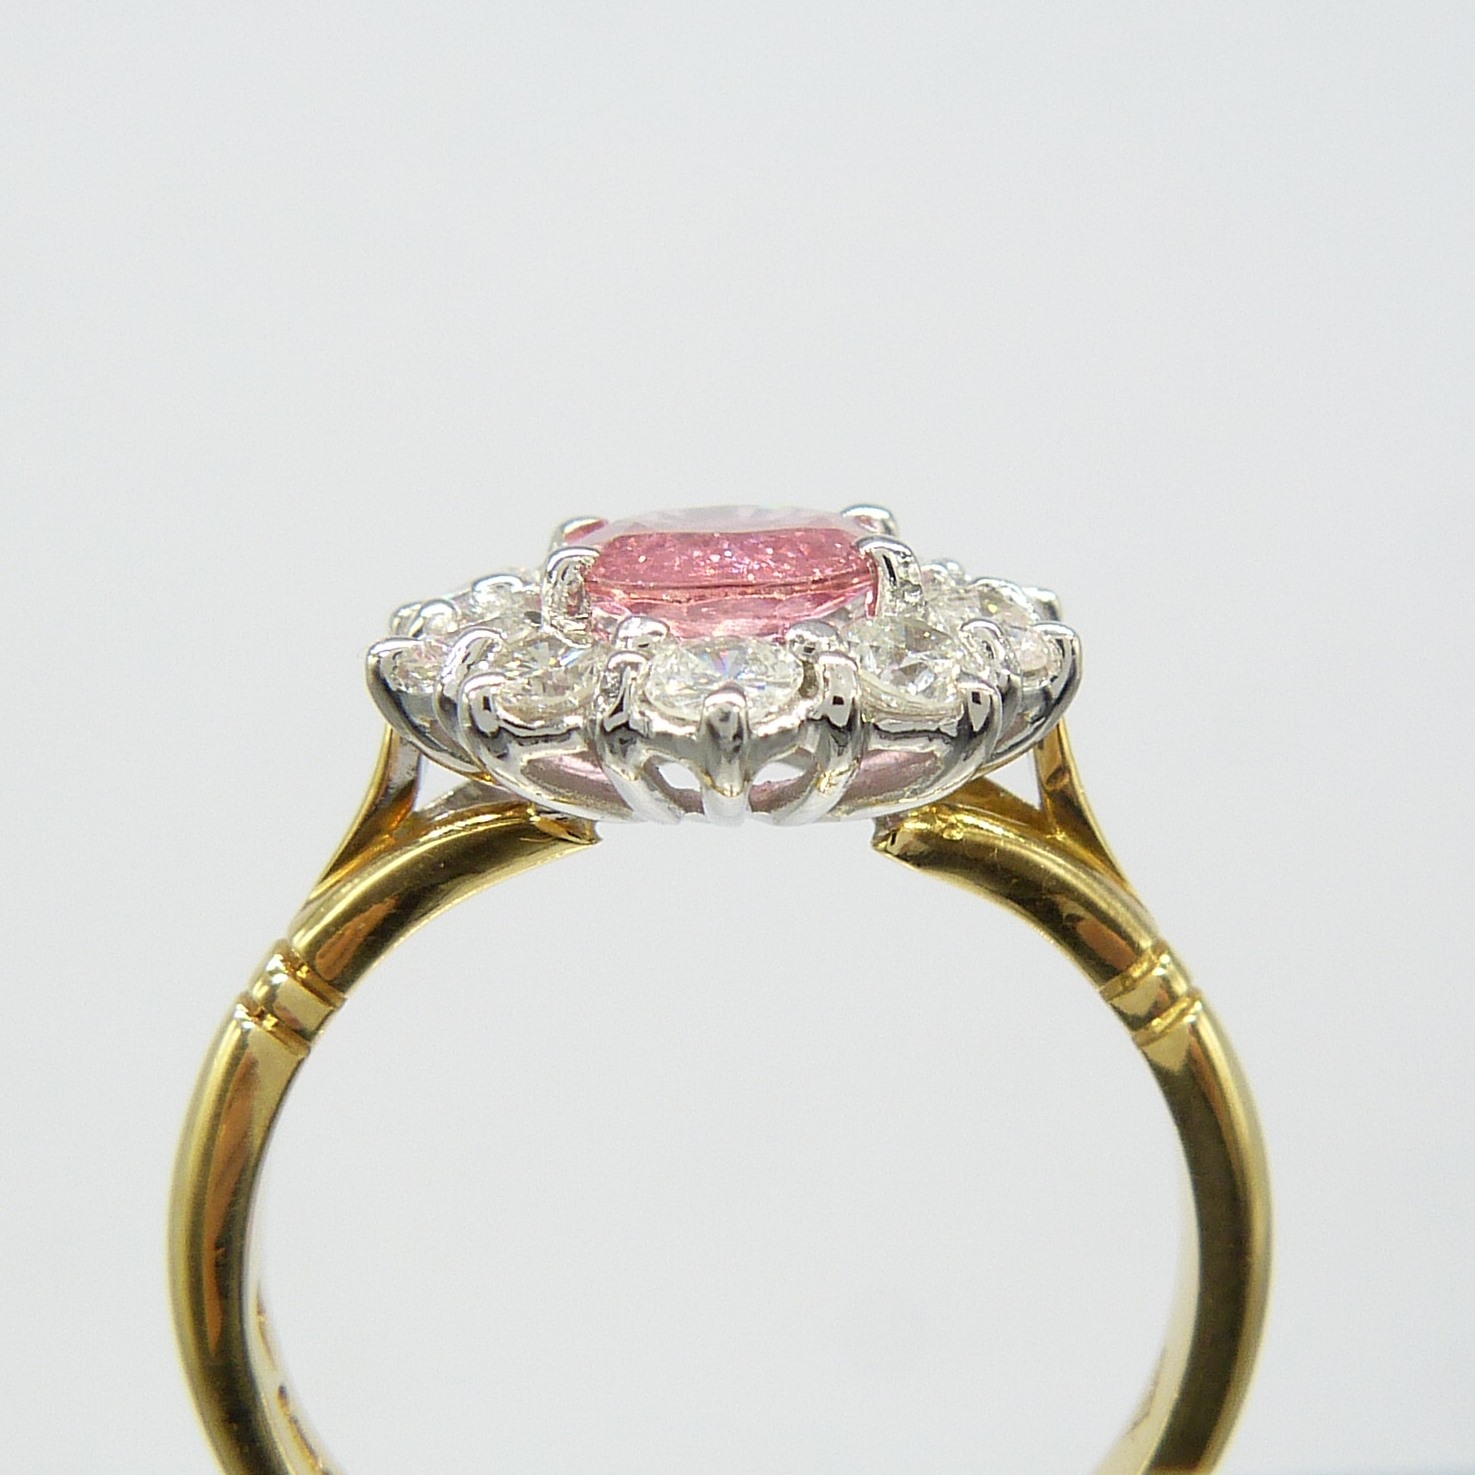 A pinkish-red natural Ruby and Diamond cluster ring in 18ct yellow and white Gold - Image 5 of 10